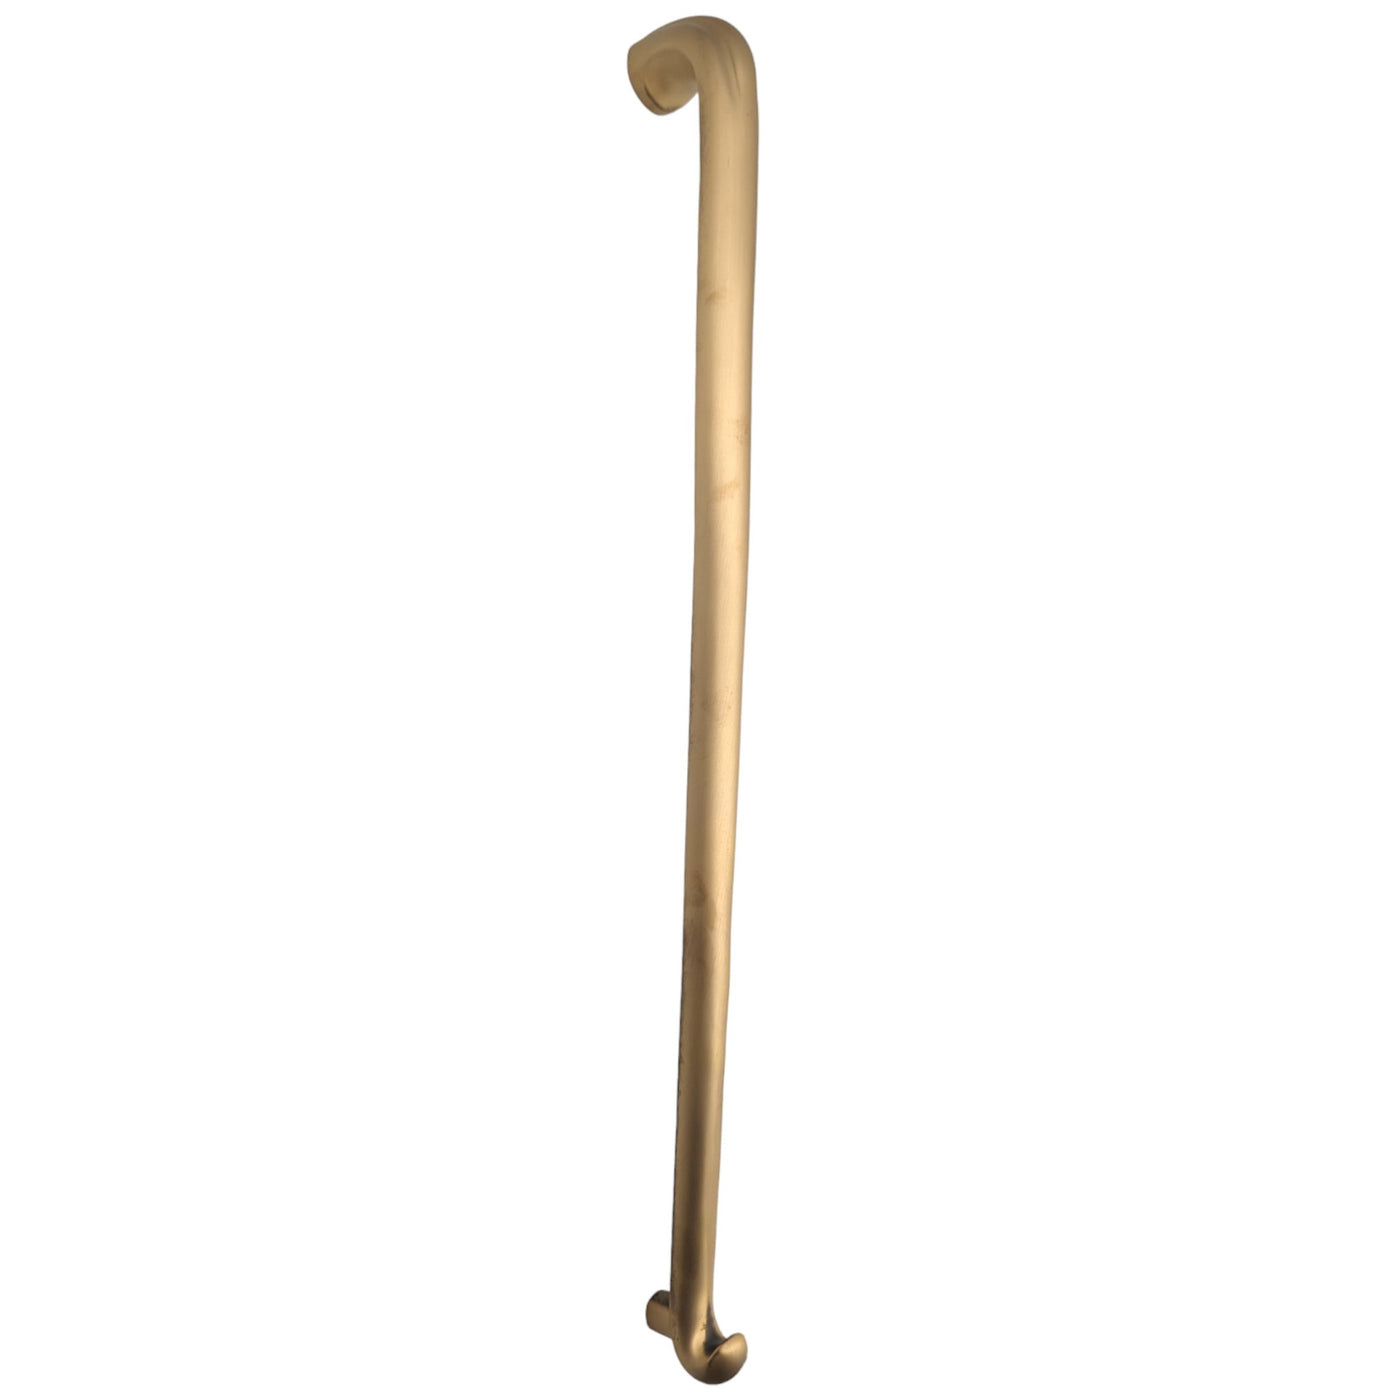 22 1/2 inch (21 inch c-c) Thornton Oversize Pull (Several Finishes Available)